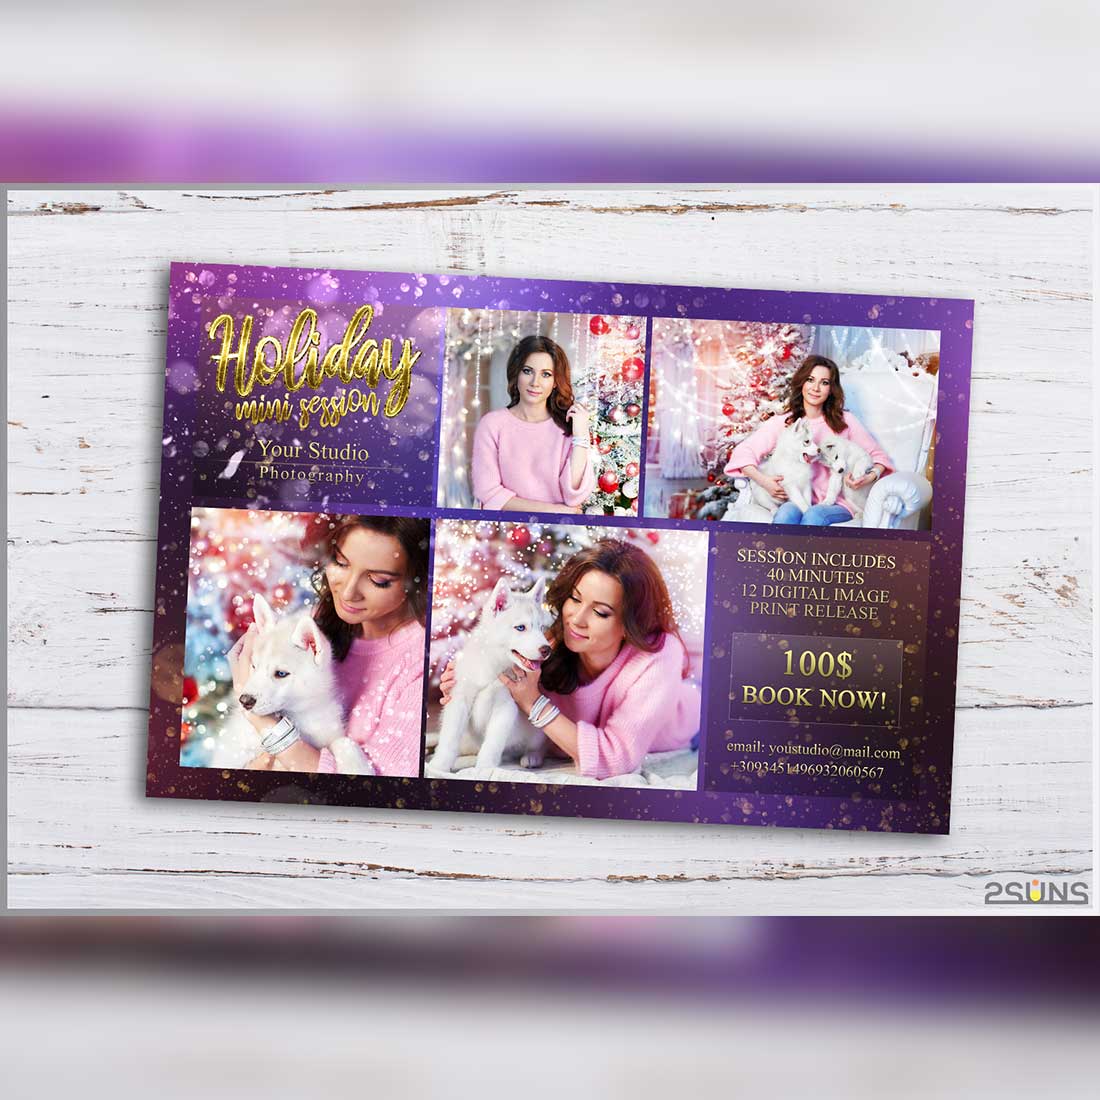 Christmas Marketing Board Watercolor Instagram Template Preview Image.